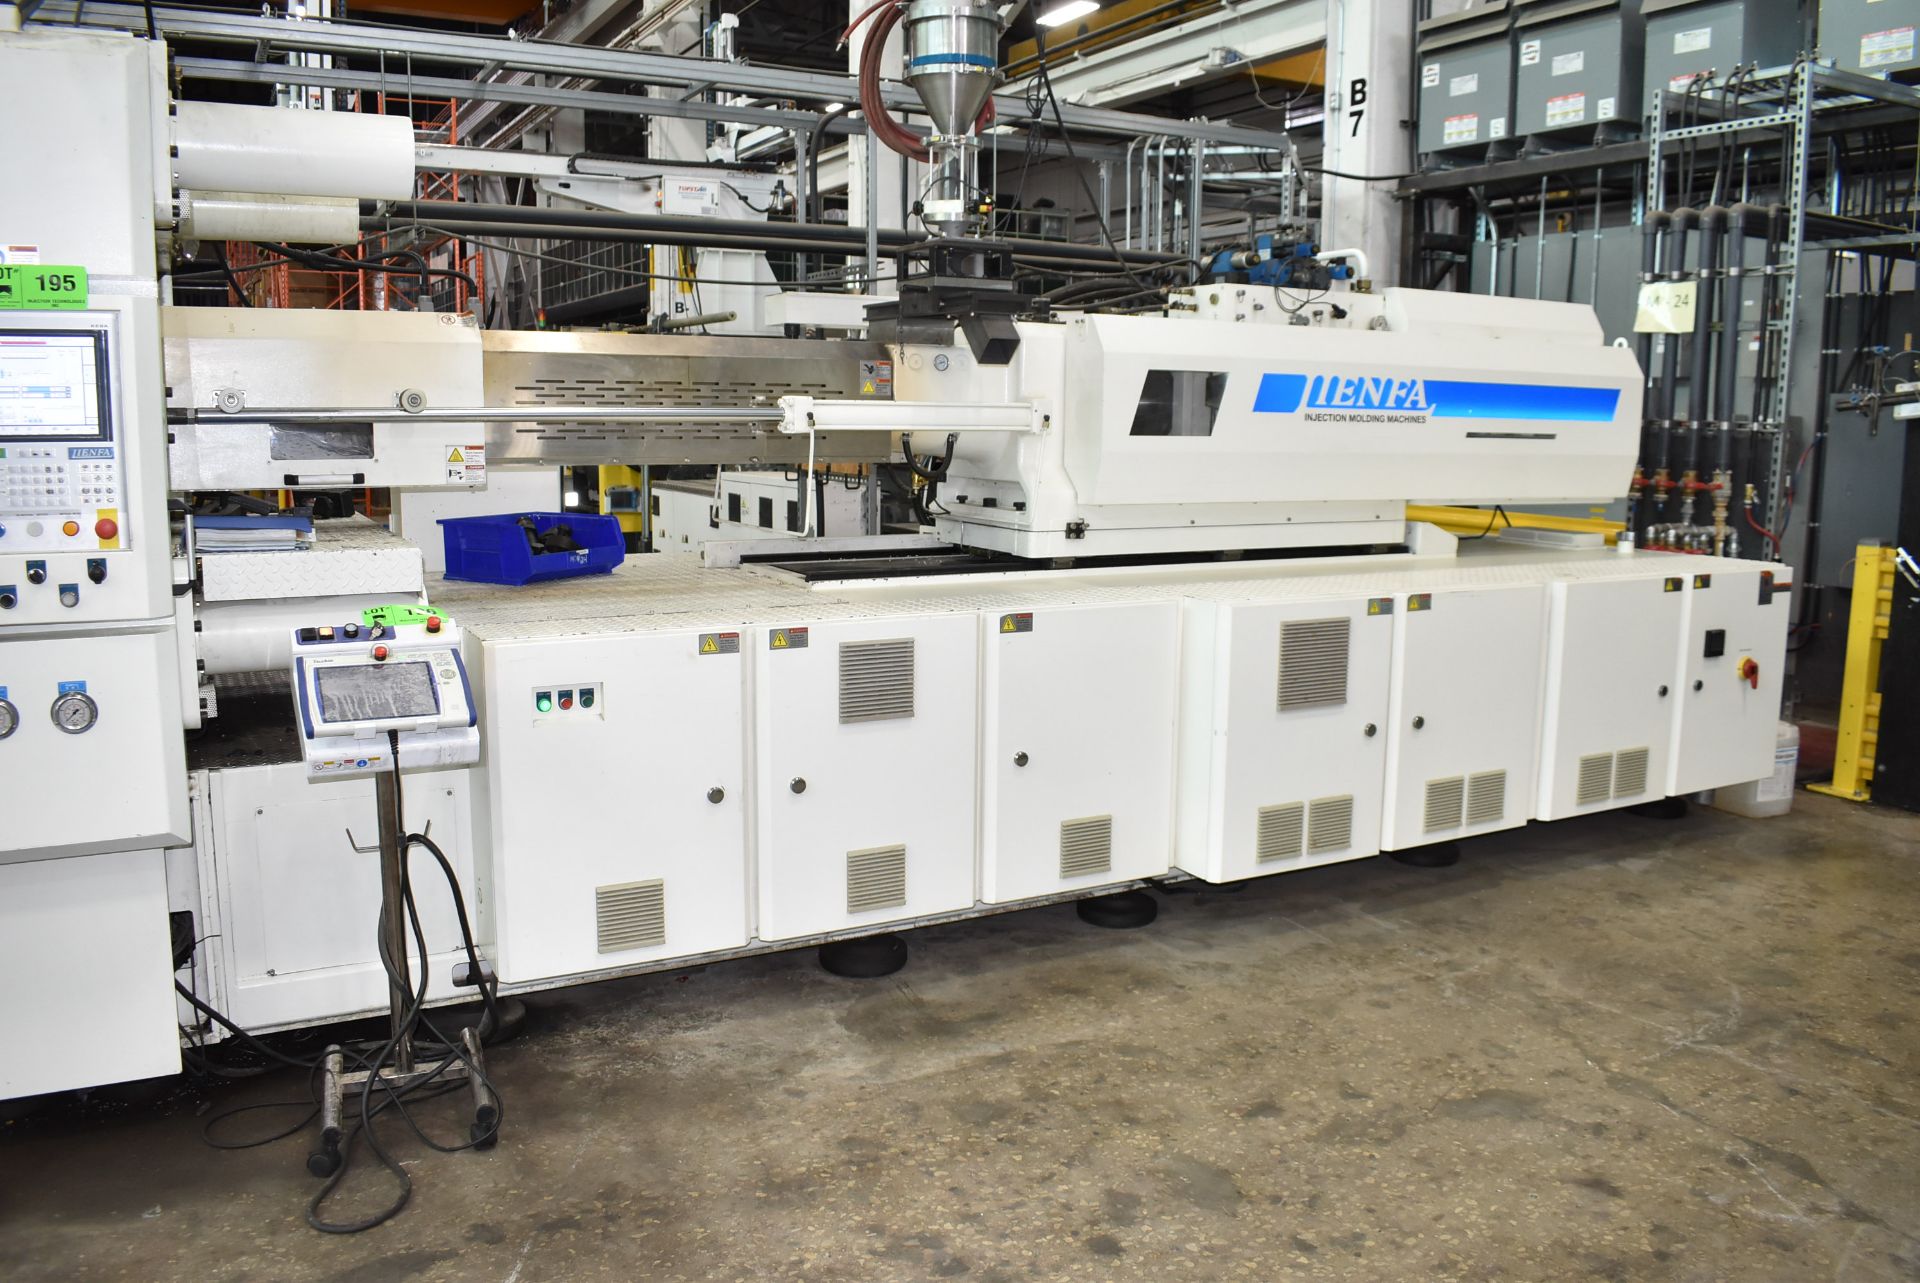 LIEN FA (2018) LF 737HB 700 TON CAPACITY HORIZONTAL PLASTIC INJECTION MOLDING MACHINE WITH LIEN FA - Image 4 of 12